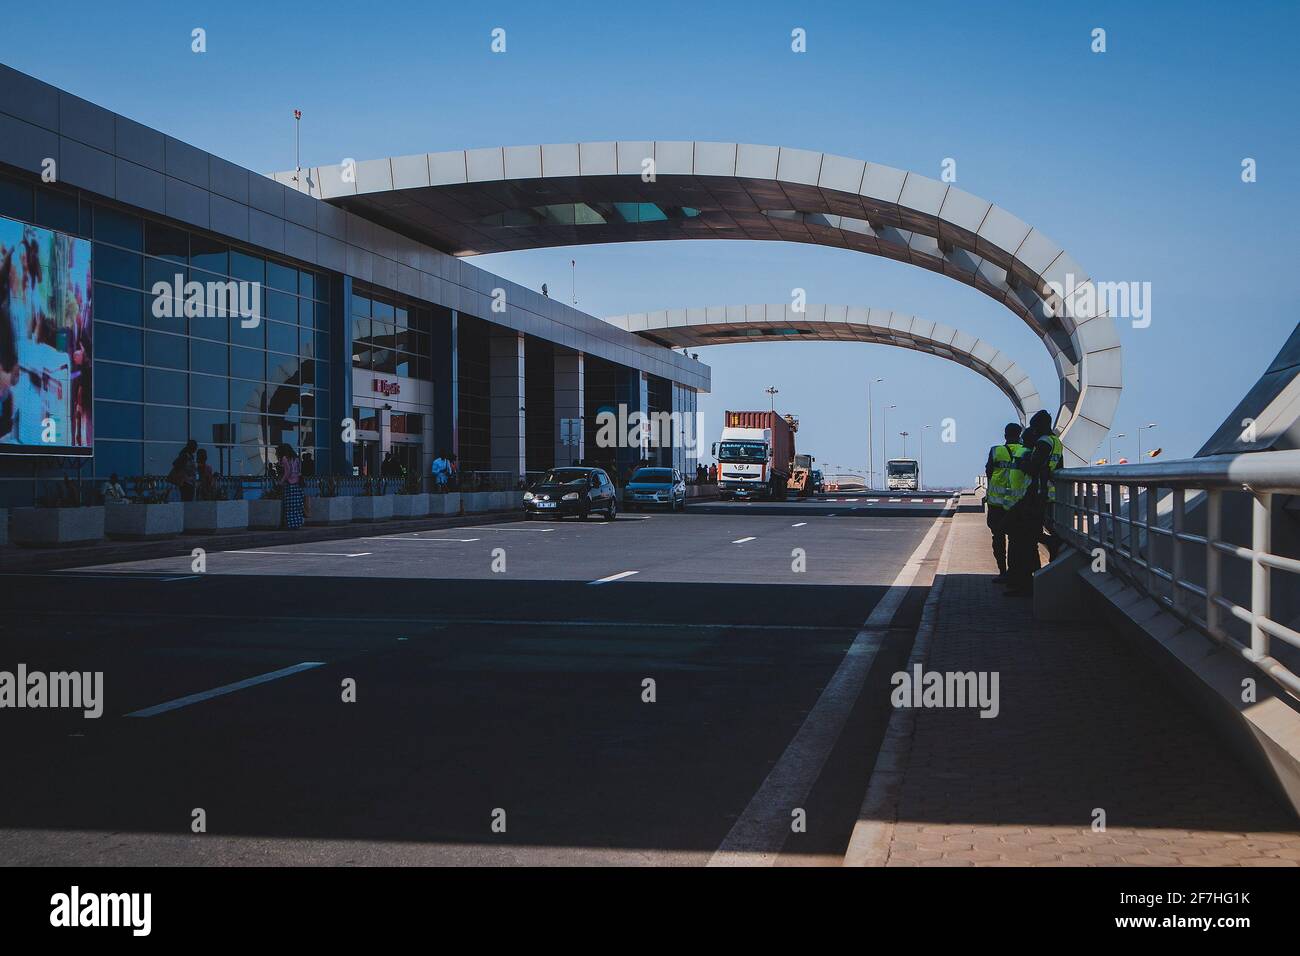 DAKAR, SENEGAL, FEBRUARY 22 2018: Departure platform on the new Blaise Diagne airport in Dakar, Senegal on a sunny day. Some people, security guards a Stock Photo